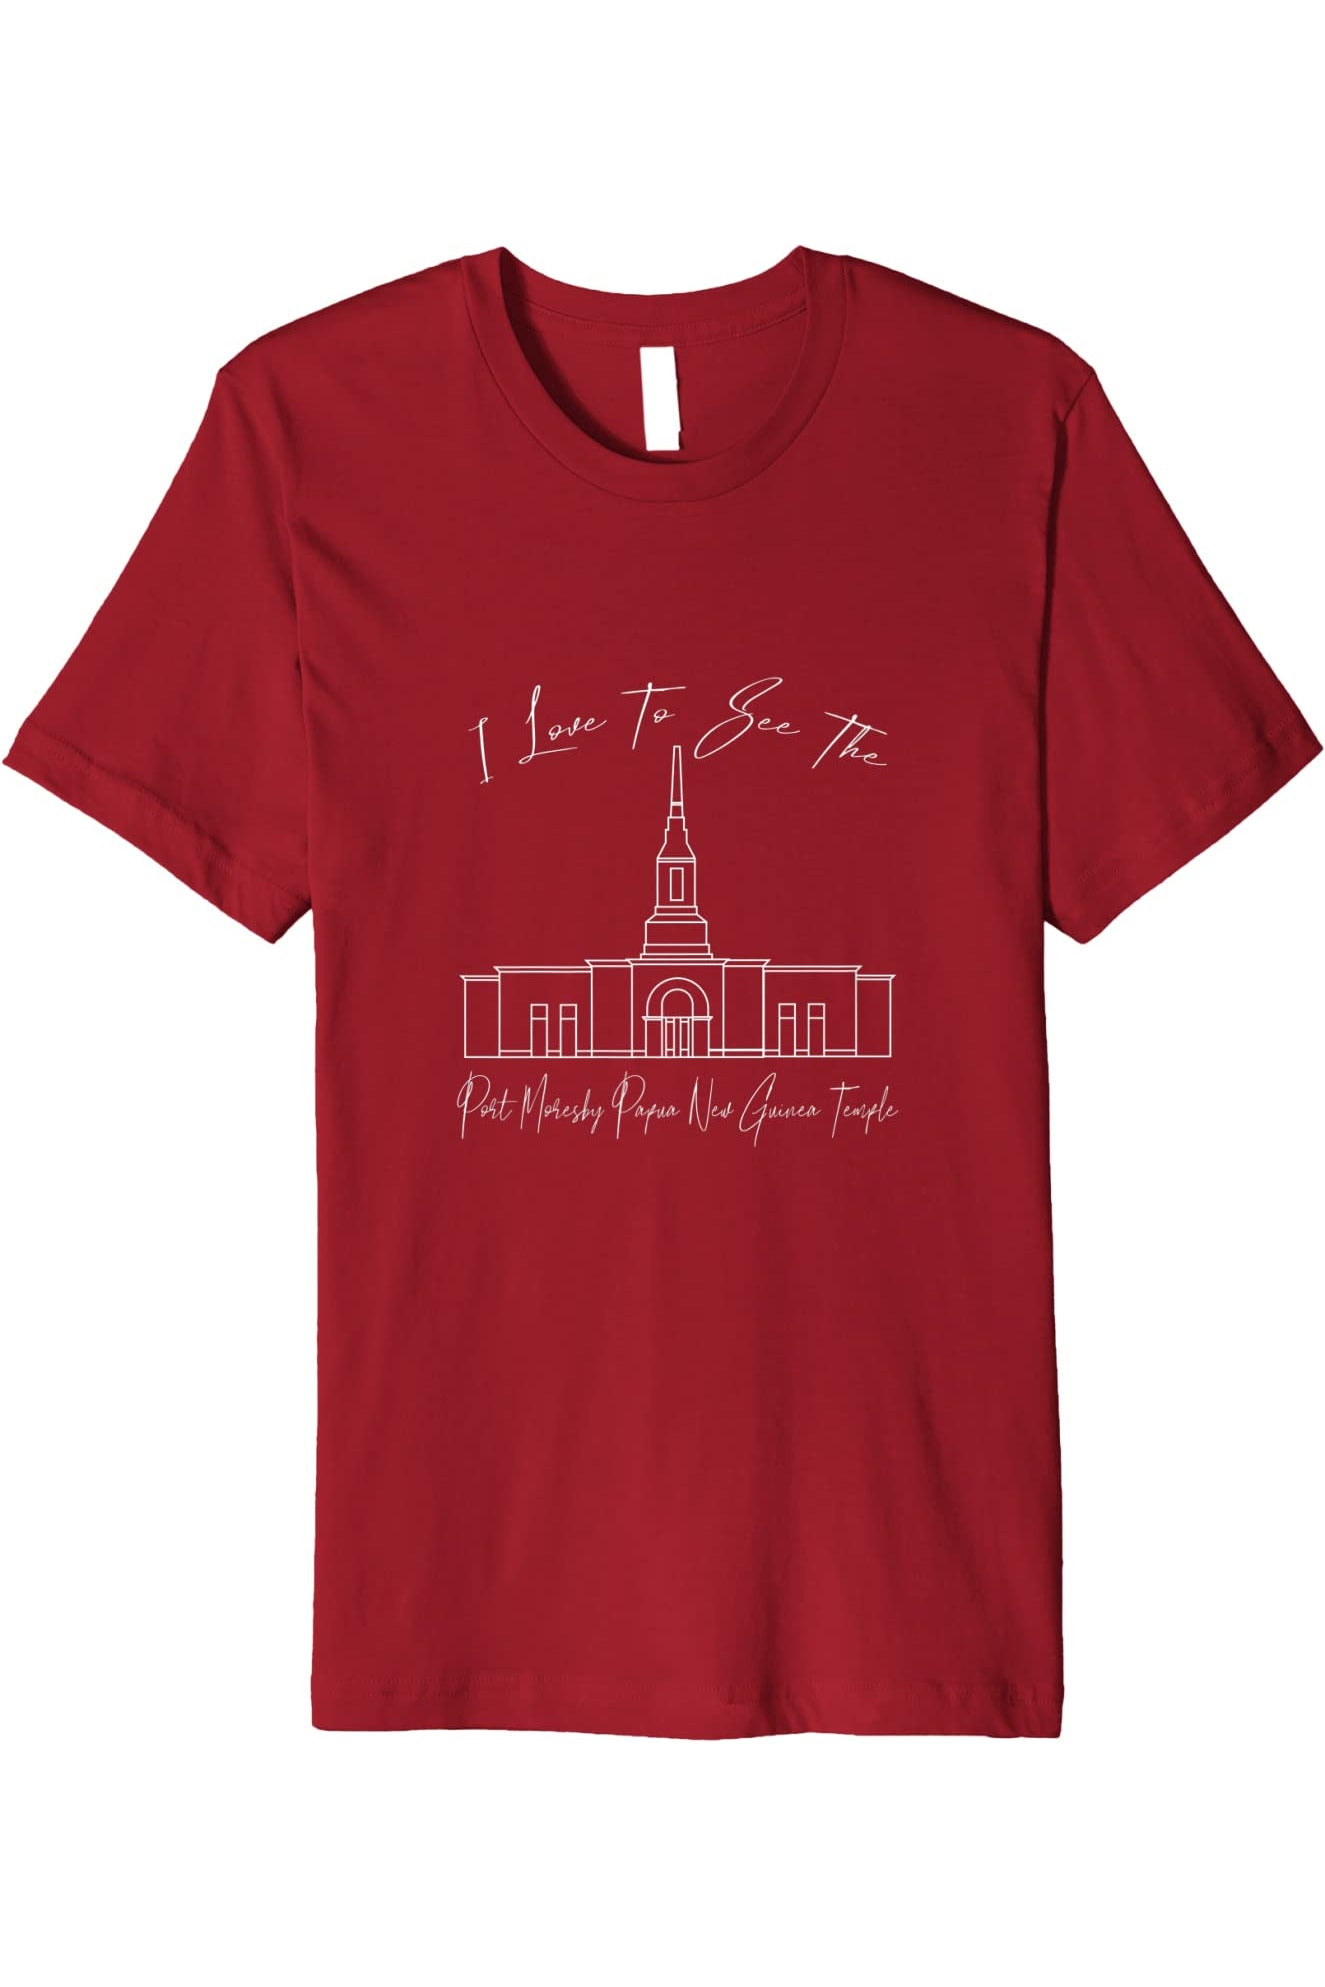 Port Moresby Papua New Guinea Temple T-Shirt - Premium - Calligraphy Style (English) US